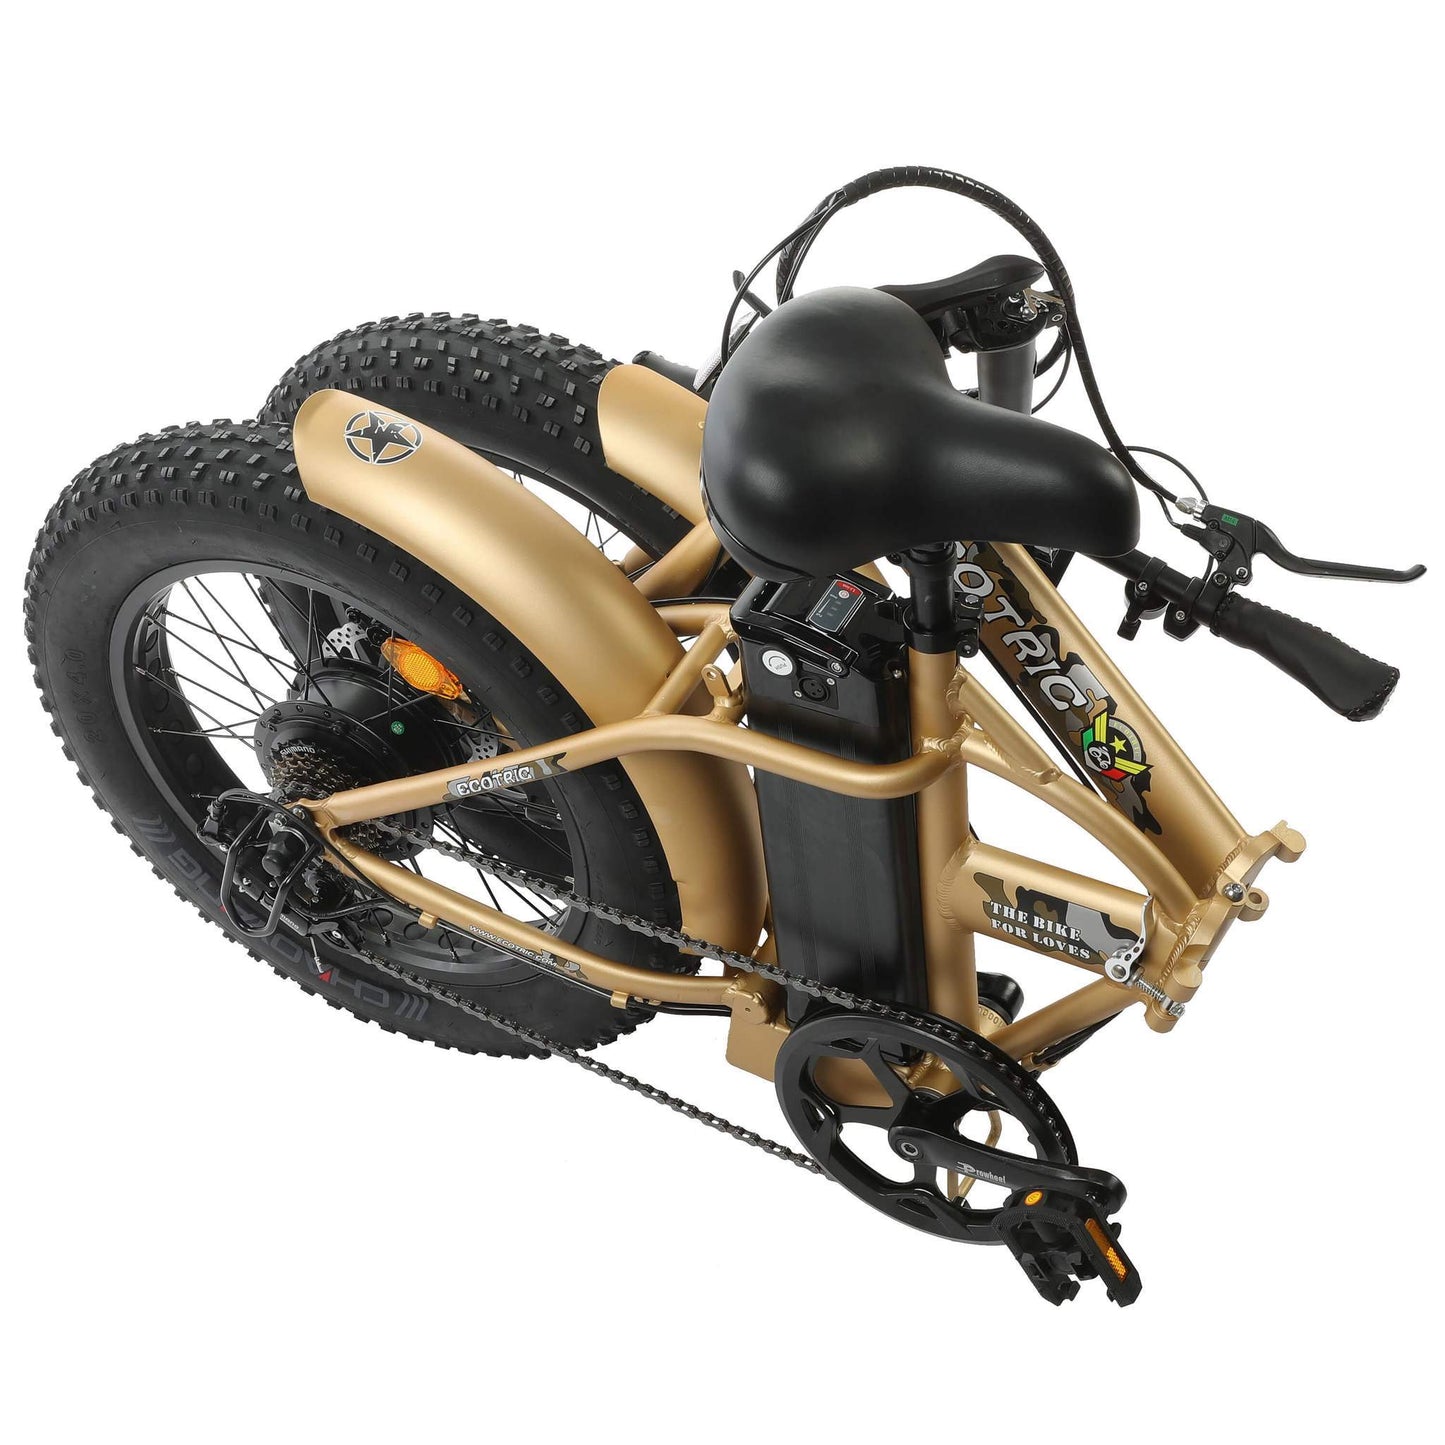 Ecotric 48V Fat Tire Portable Folding Electric Bike w/ LCD display - Gold